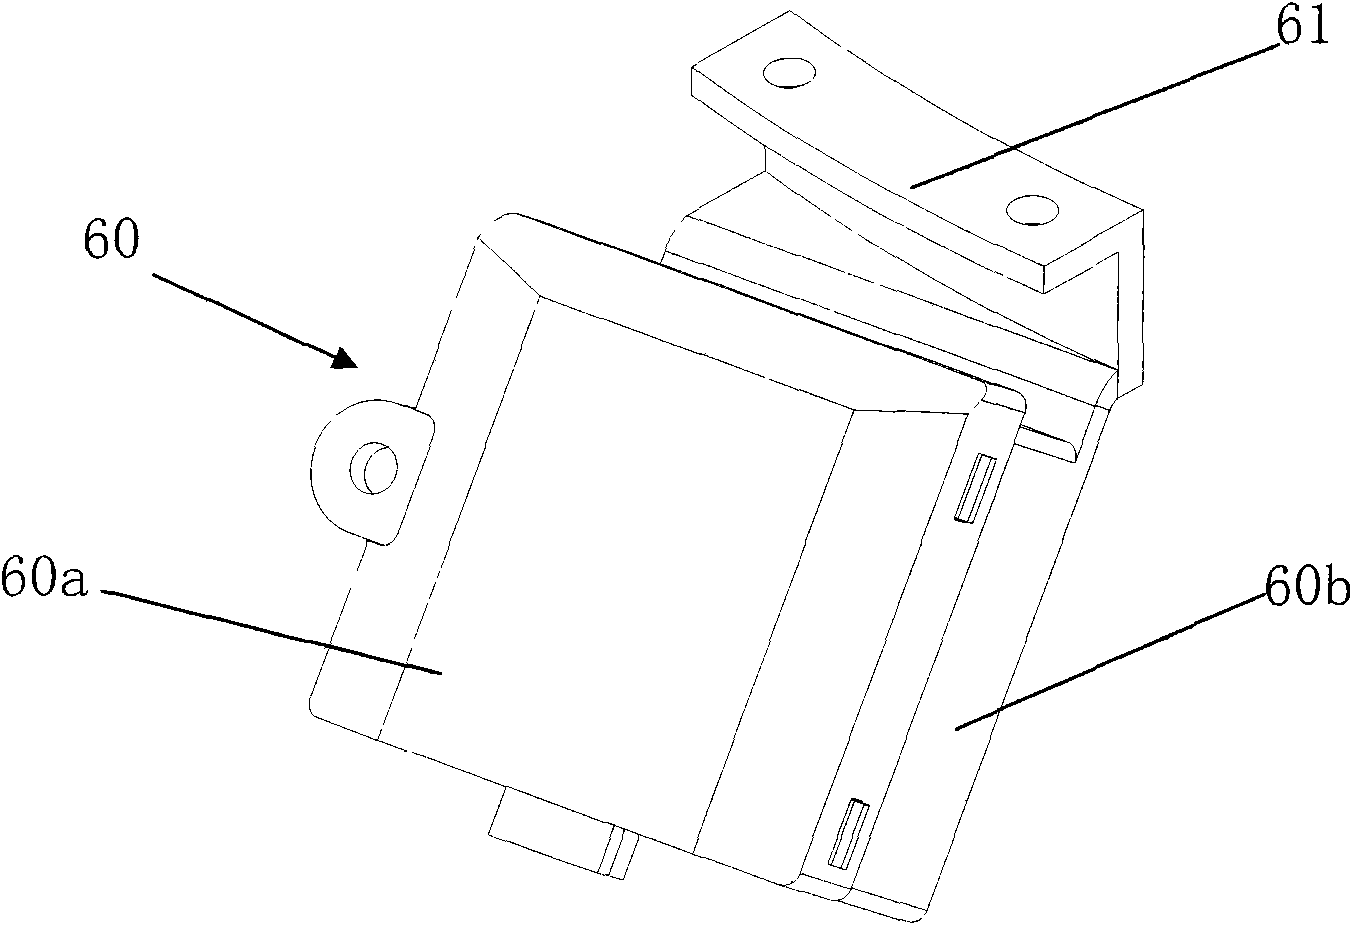 Sensor structure of microwave oven